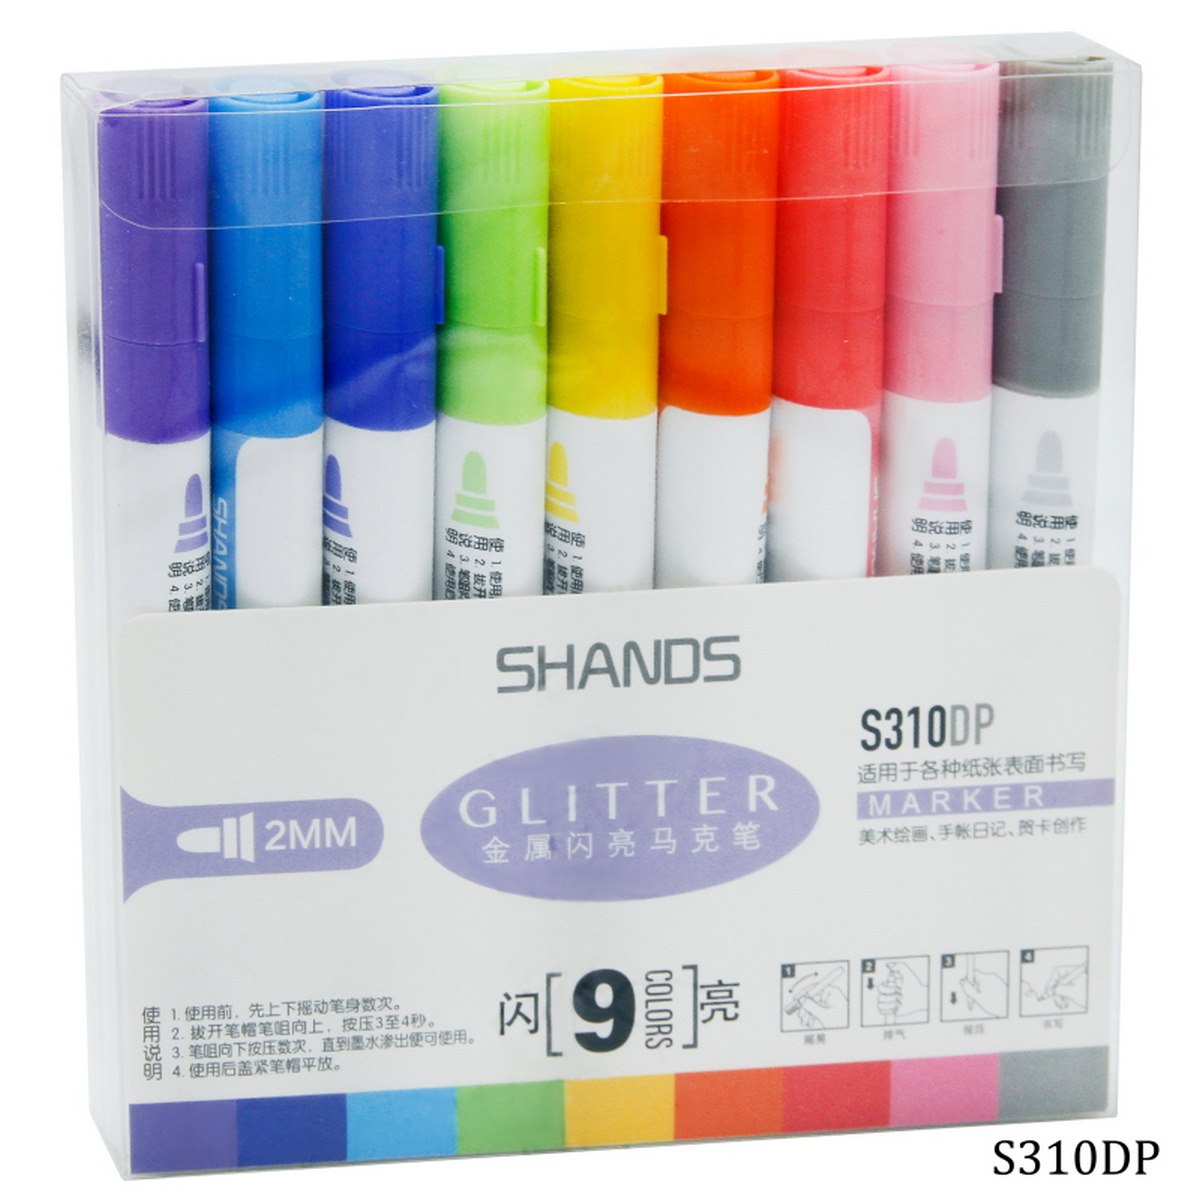 jags-mumbai Marker Shands Glitter Marker 2mm 9 Vibrant Colors, Perfect for Scrapbooking, School Projects, and More S310DP